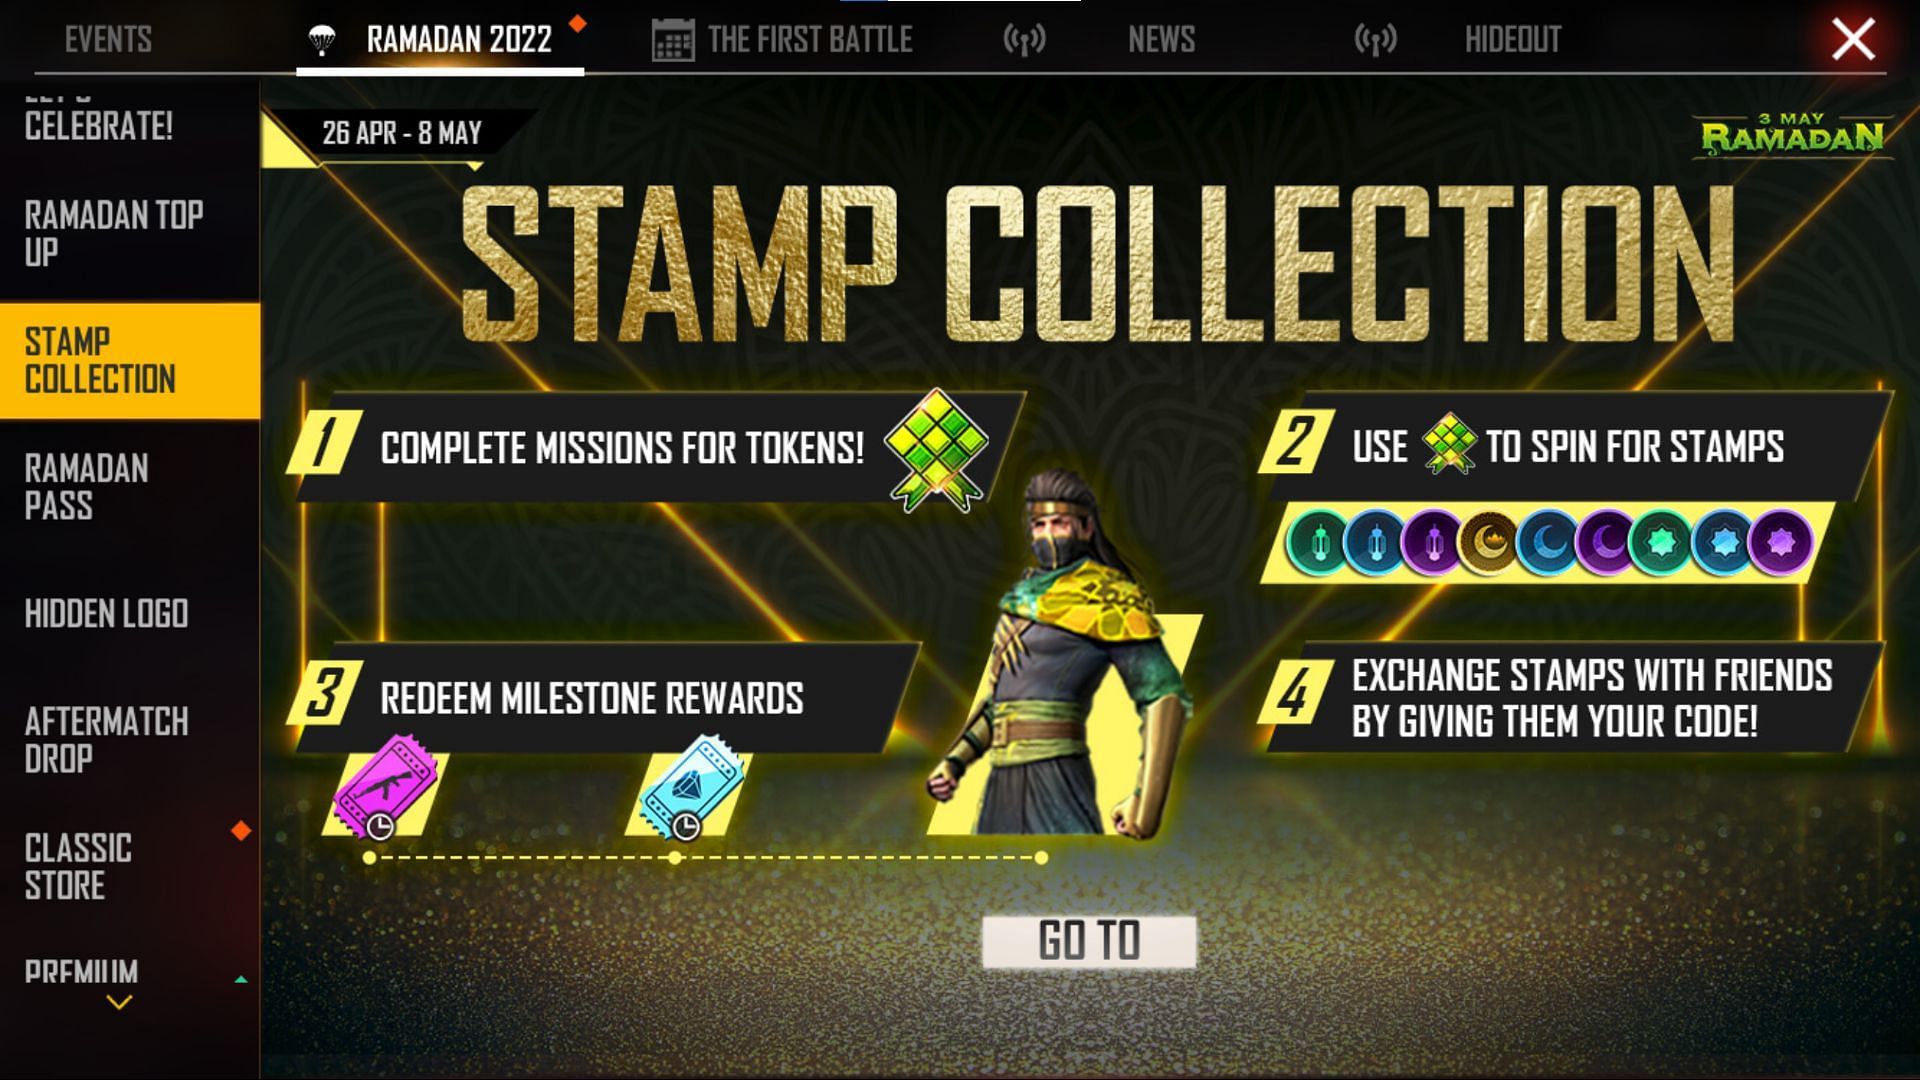 The Stamp Collection event in Free Fire (Image via Garena)